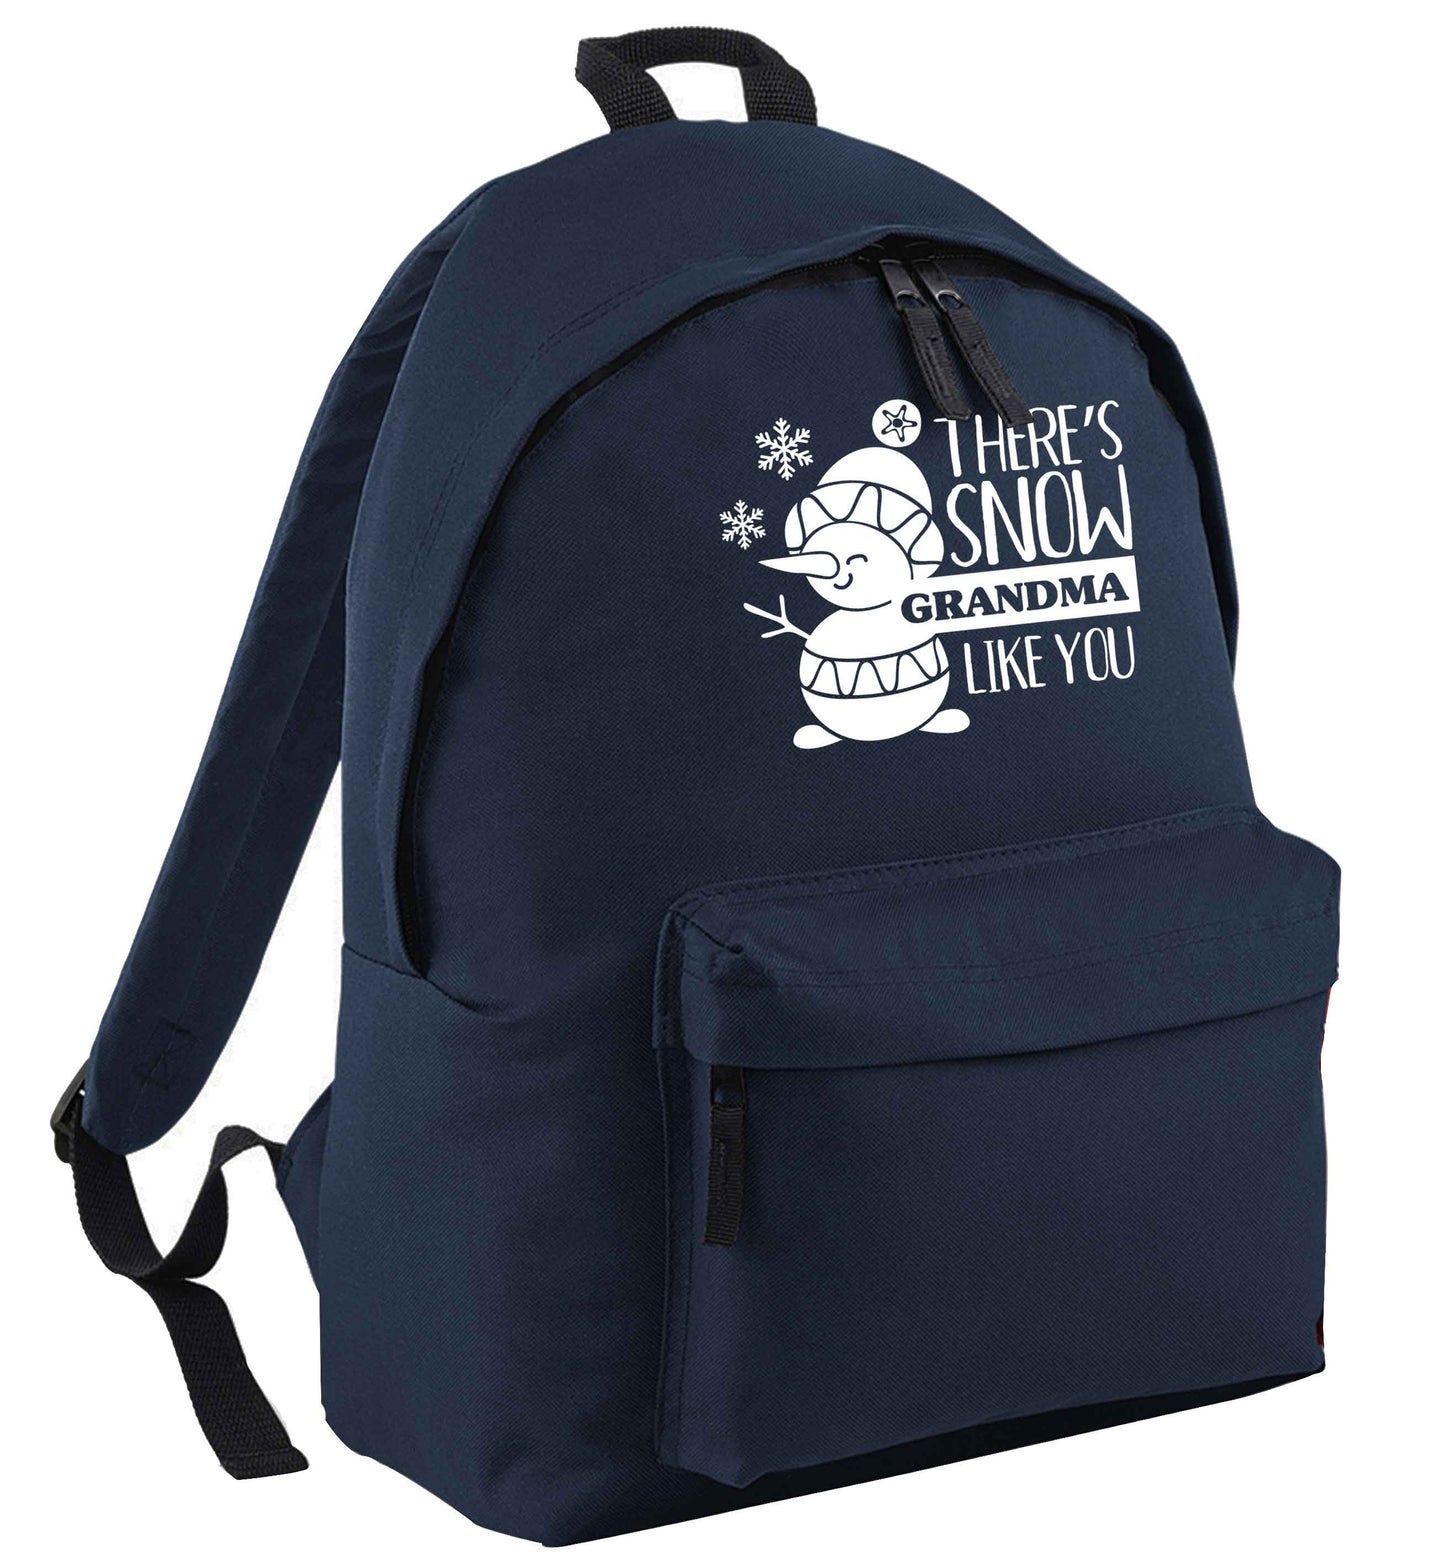 There's snow grandma like you | Children's backpack